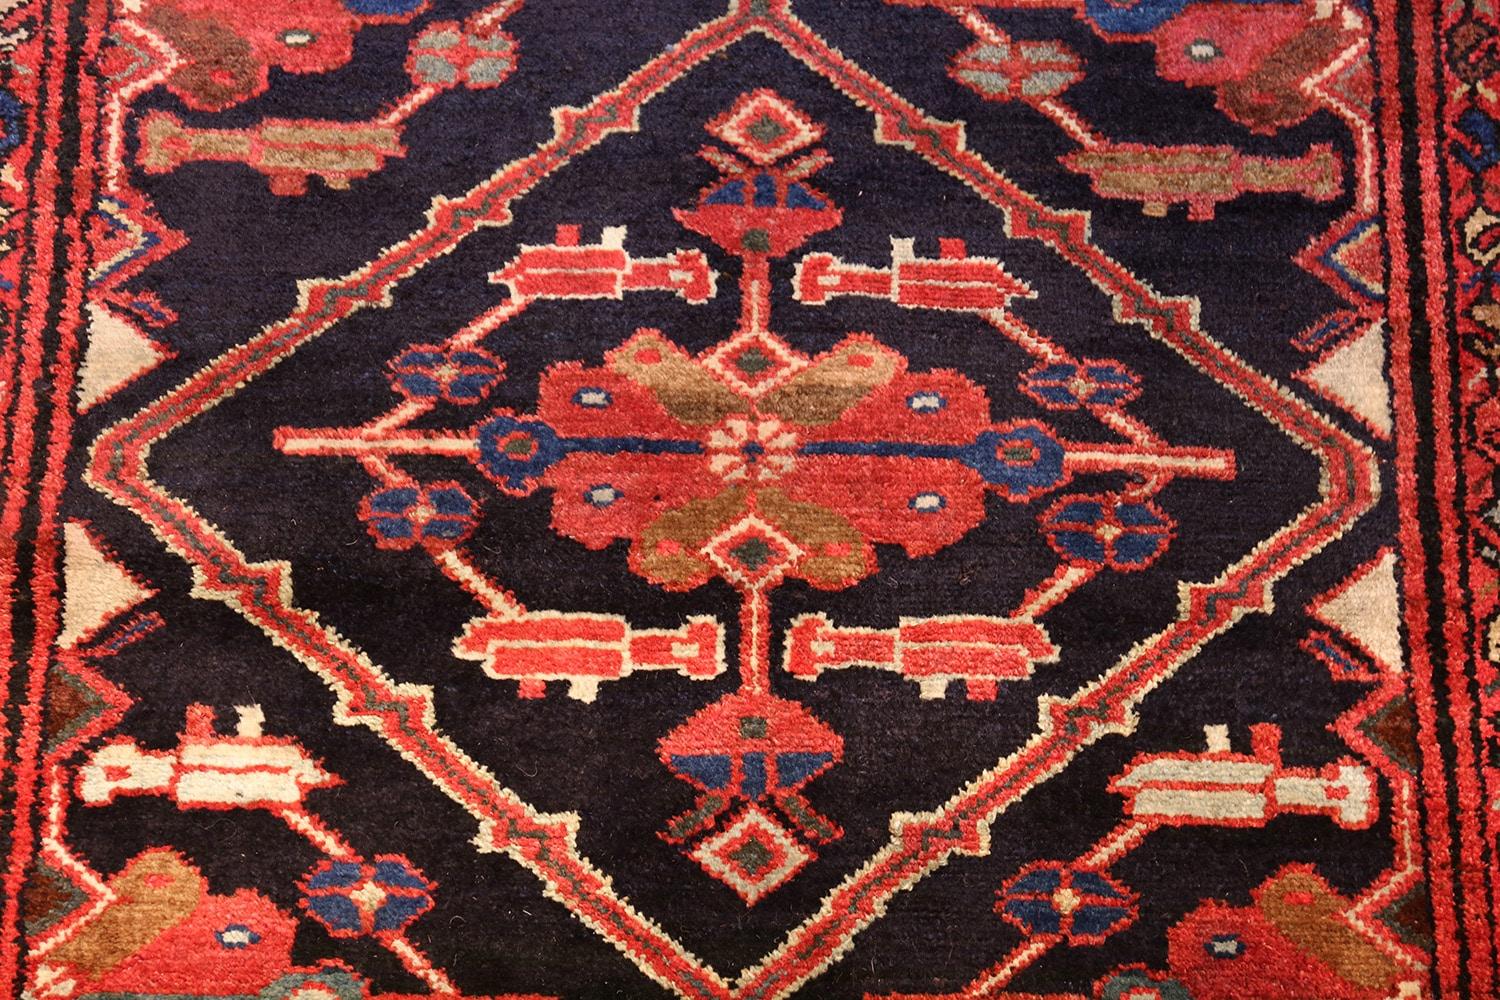 Hand-Knotted Antique Persian Malayer Runner Rug. 3' 4